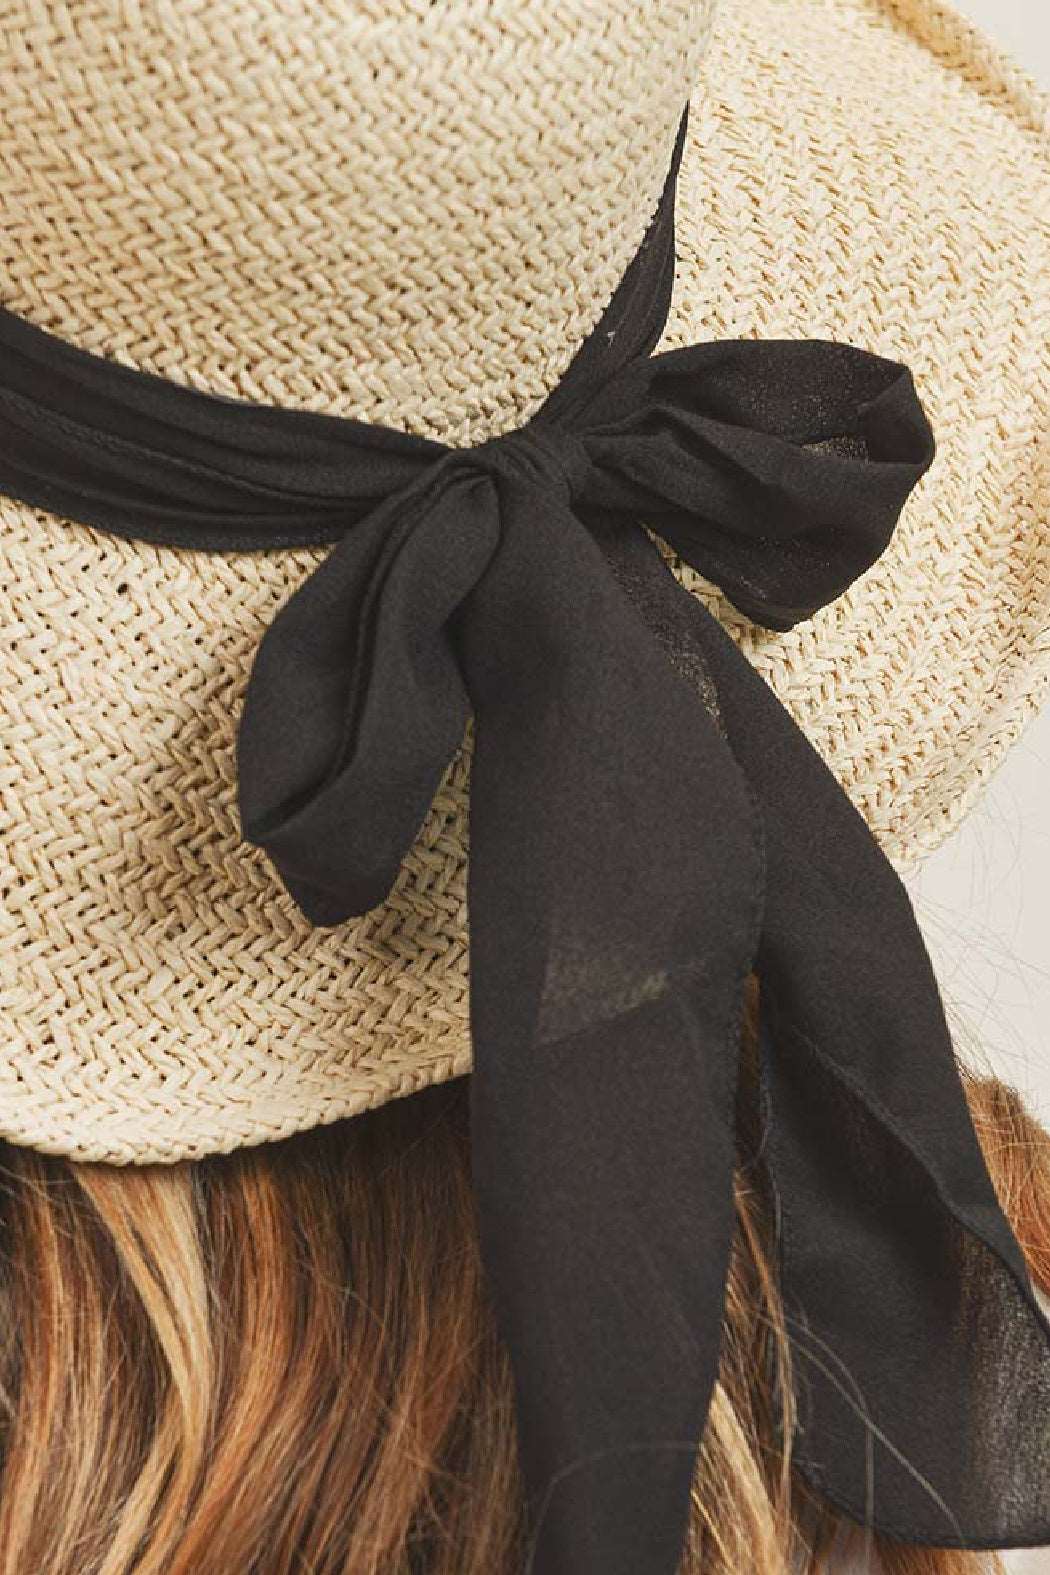 Packable Straw Beach Hat by Embellish Your Life